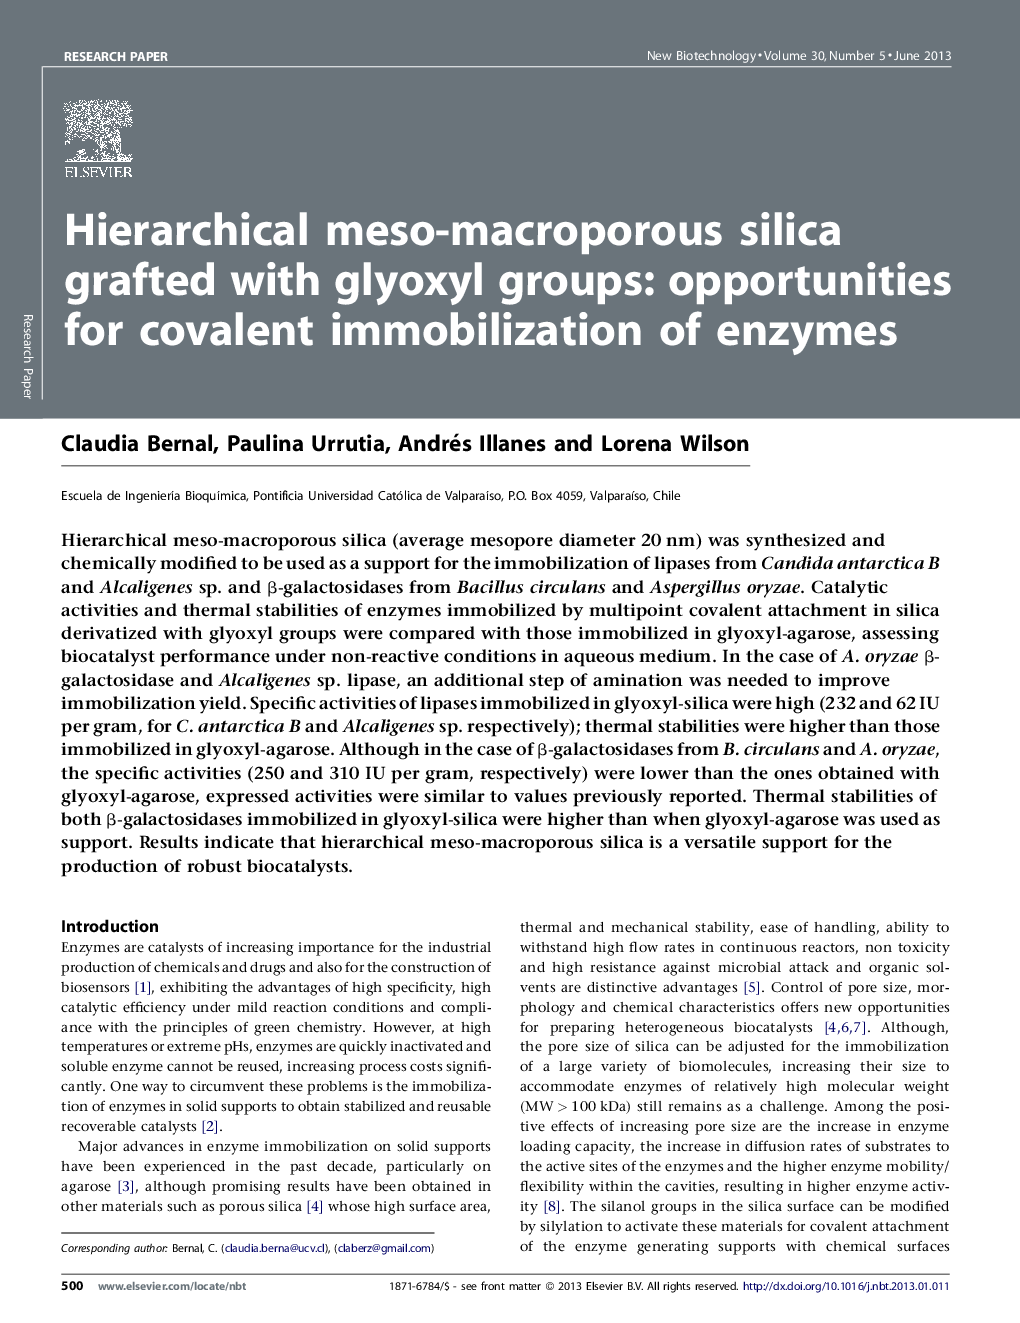 Hierarchical meso-macroporous silica grafted with glyoxyl groups: opportunities for covalent immobilization of enzymes